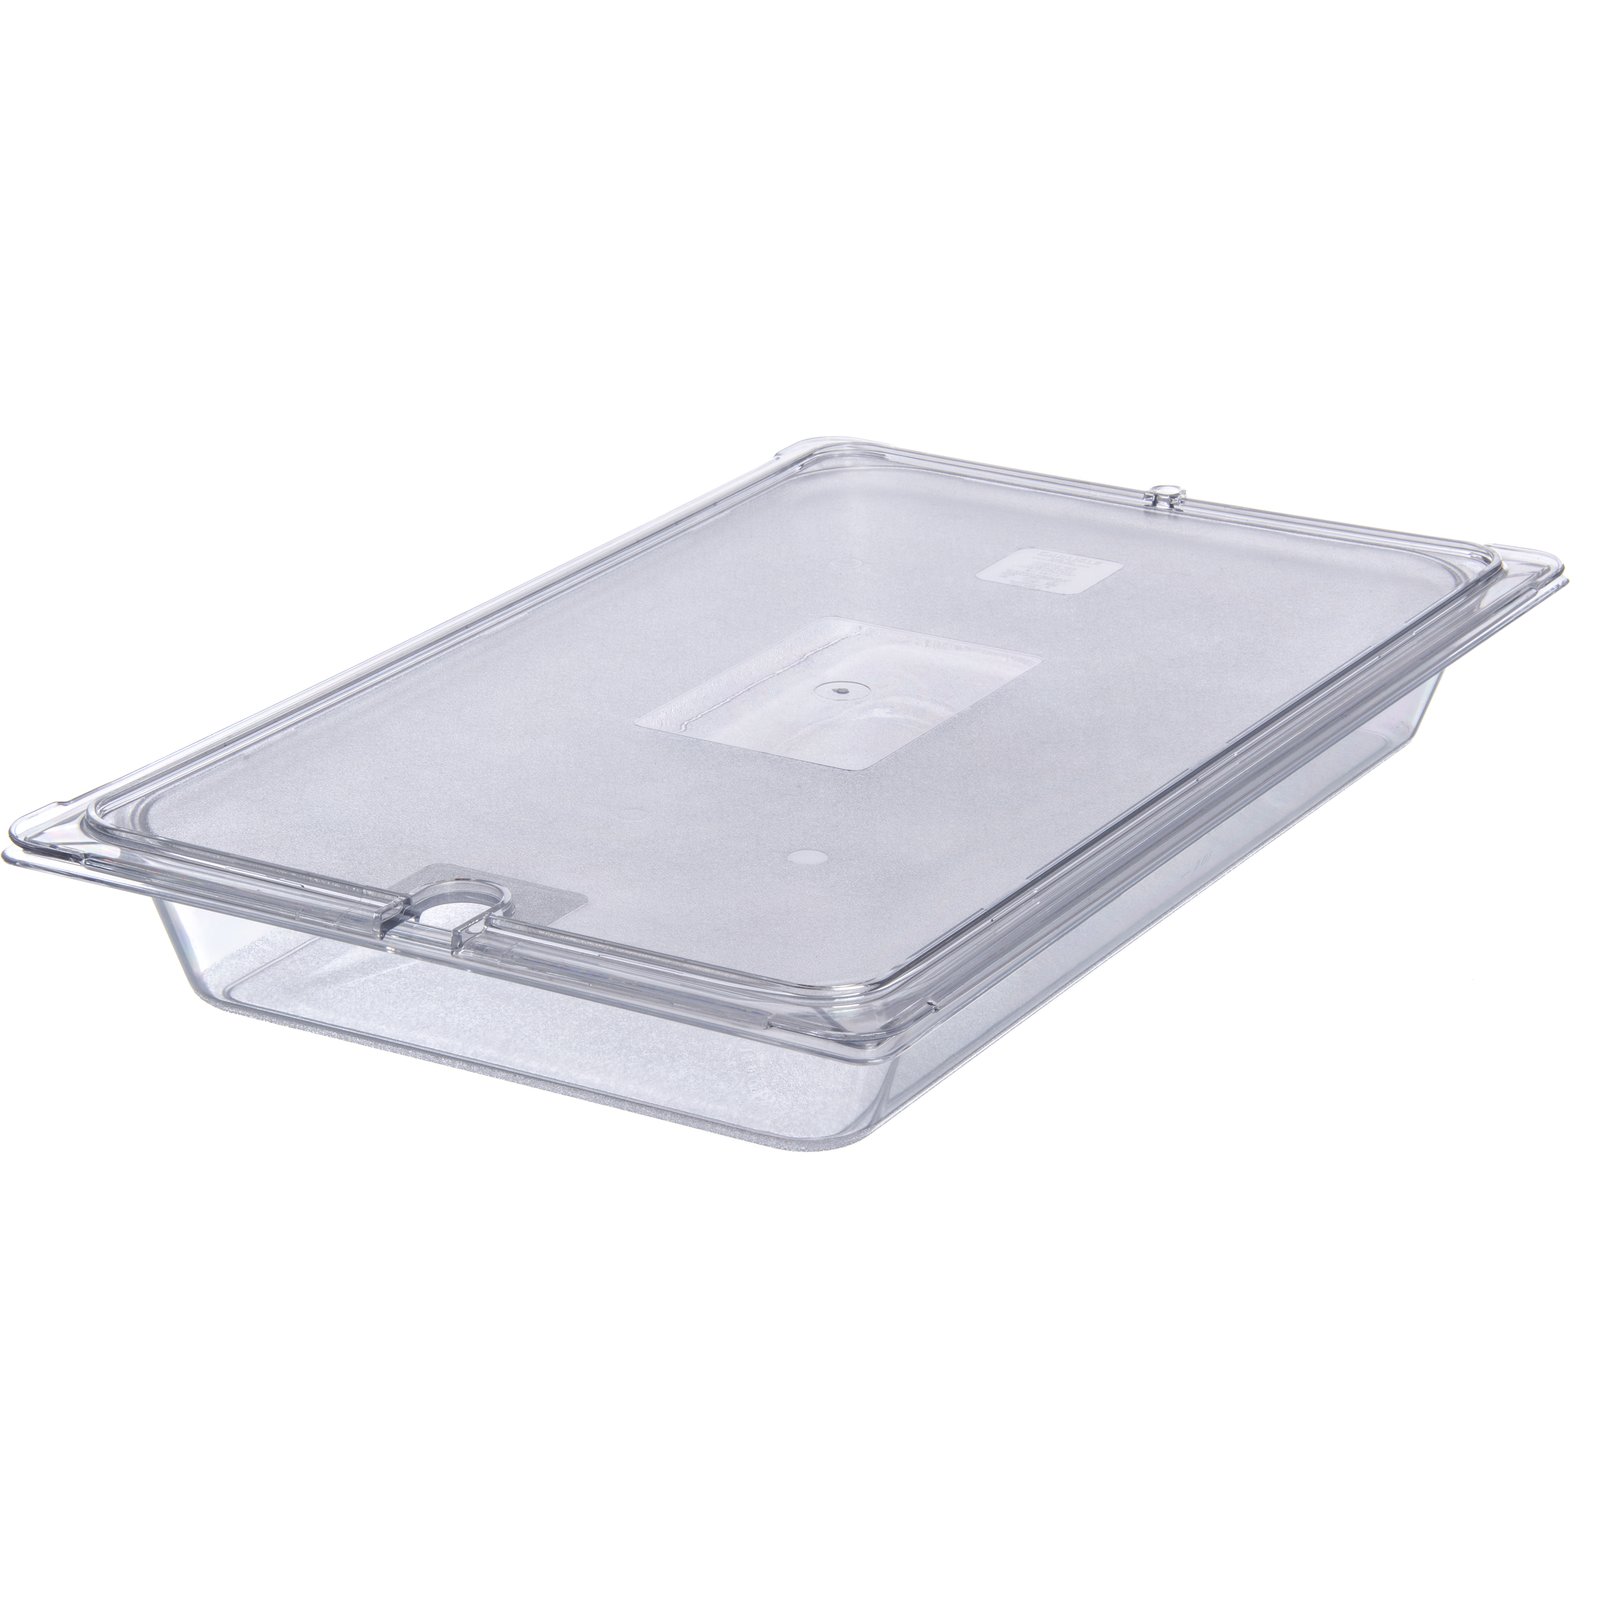 Details about   NEW CARLISLE 10202B07 STORPLUS FULL SIZE CLEAR POLYCARBONATE FOOD PAN PACK OF 6 